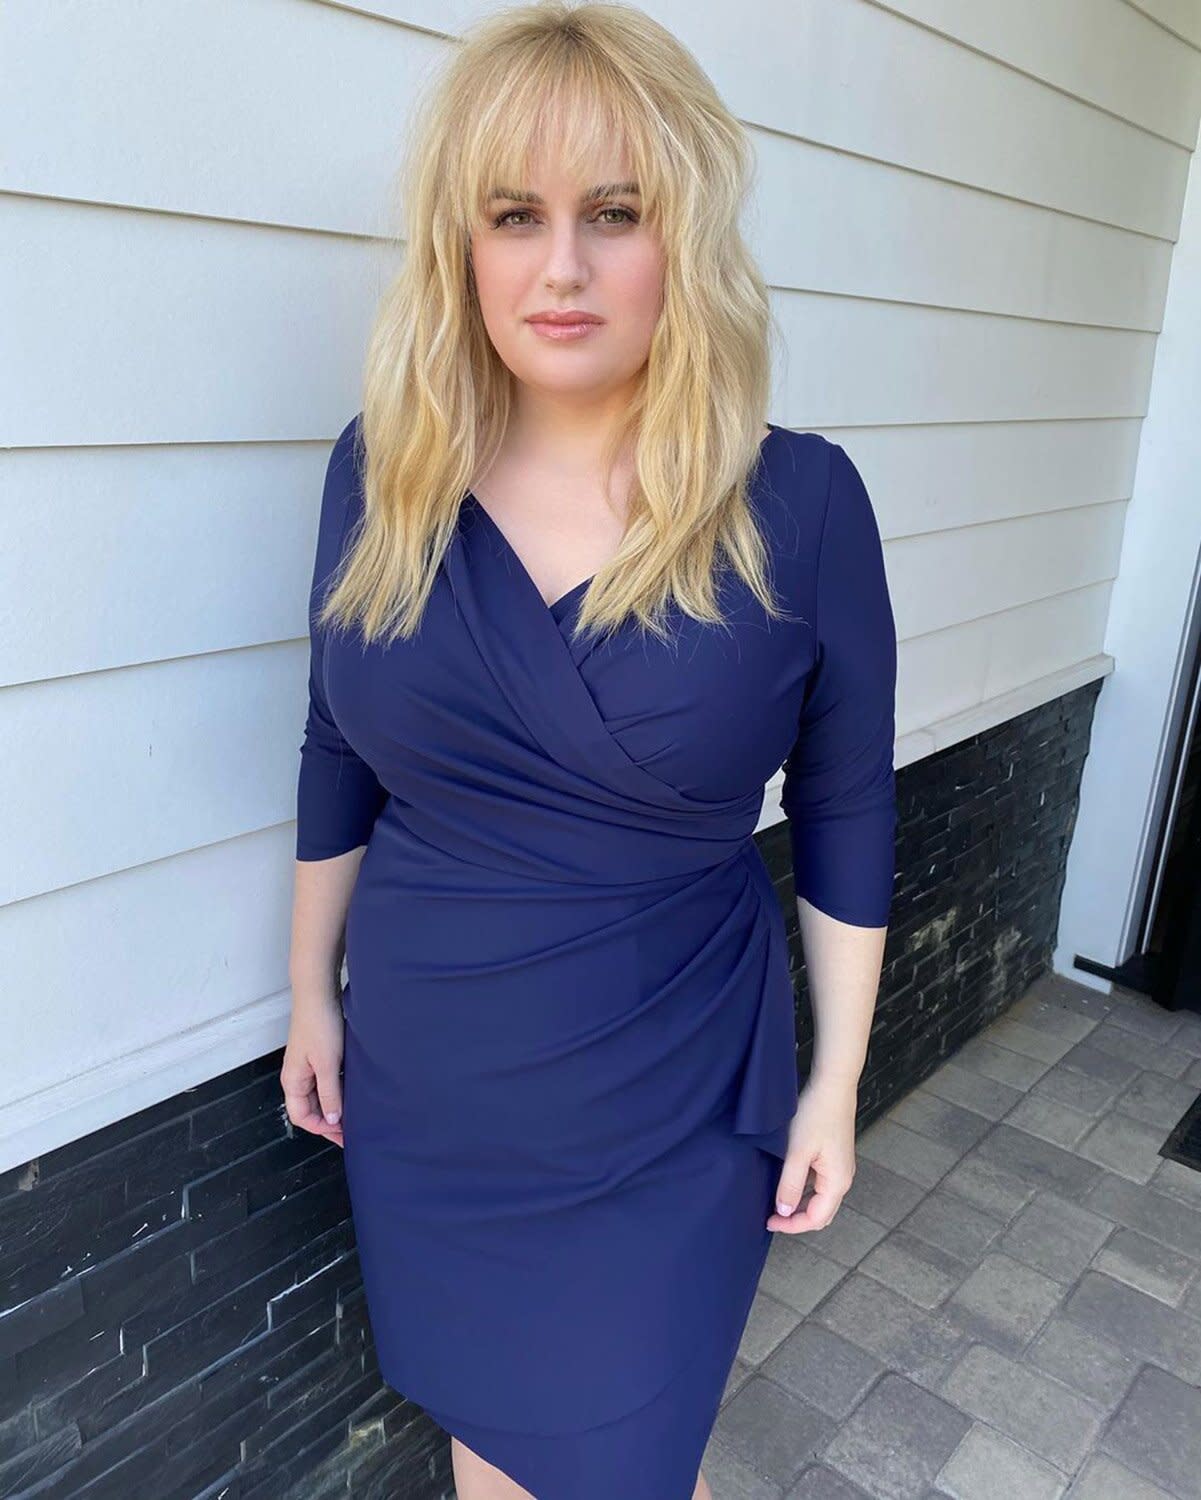 Rebel Wilson Says She's About 18 Pounds Away from Her Weight Loss Goal ...